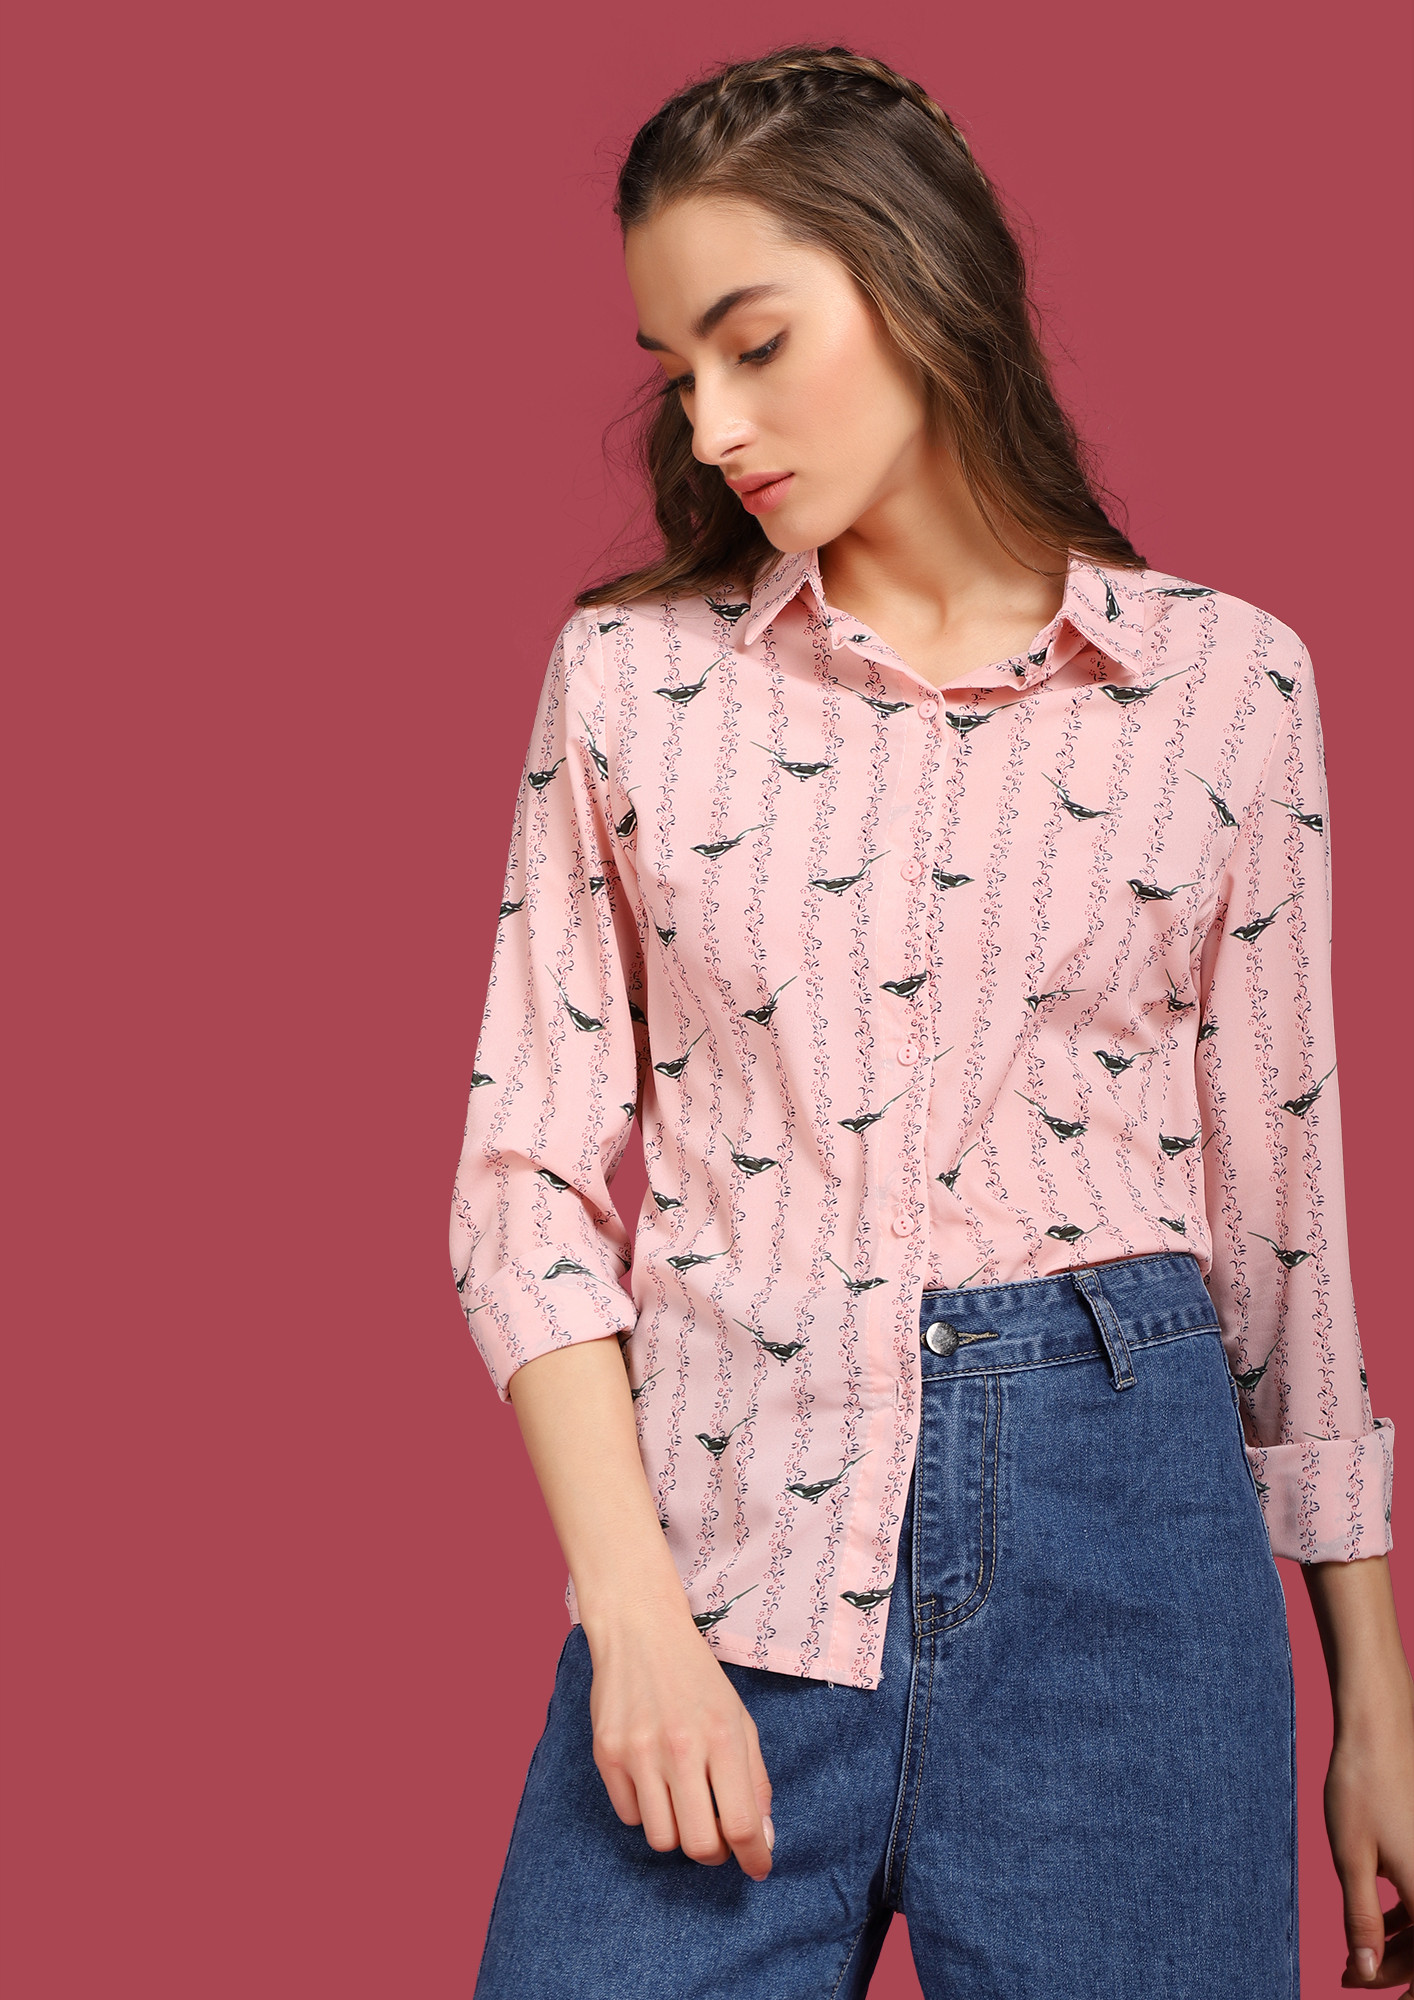 SHOW OFF YOUR CHIRPY SIDE PINK SHIRT